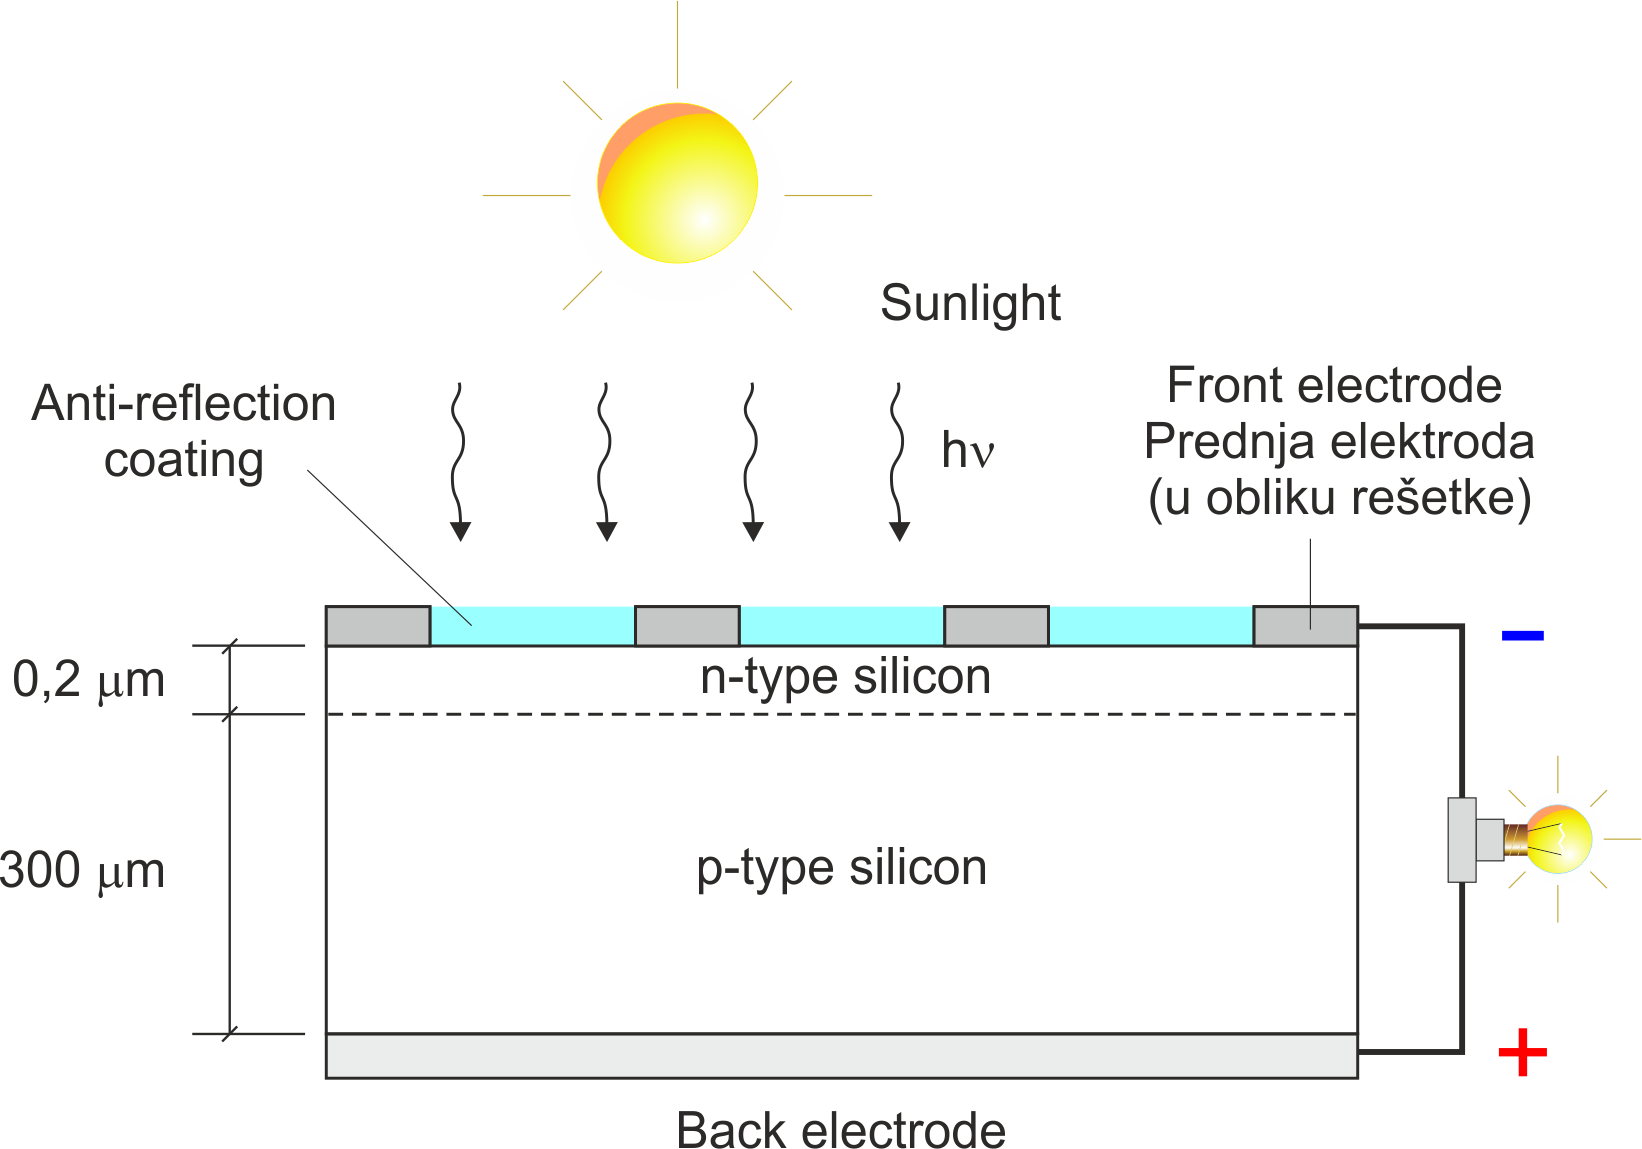 Direct download link: https://www.periodni.com/gallery/solar_cell.png